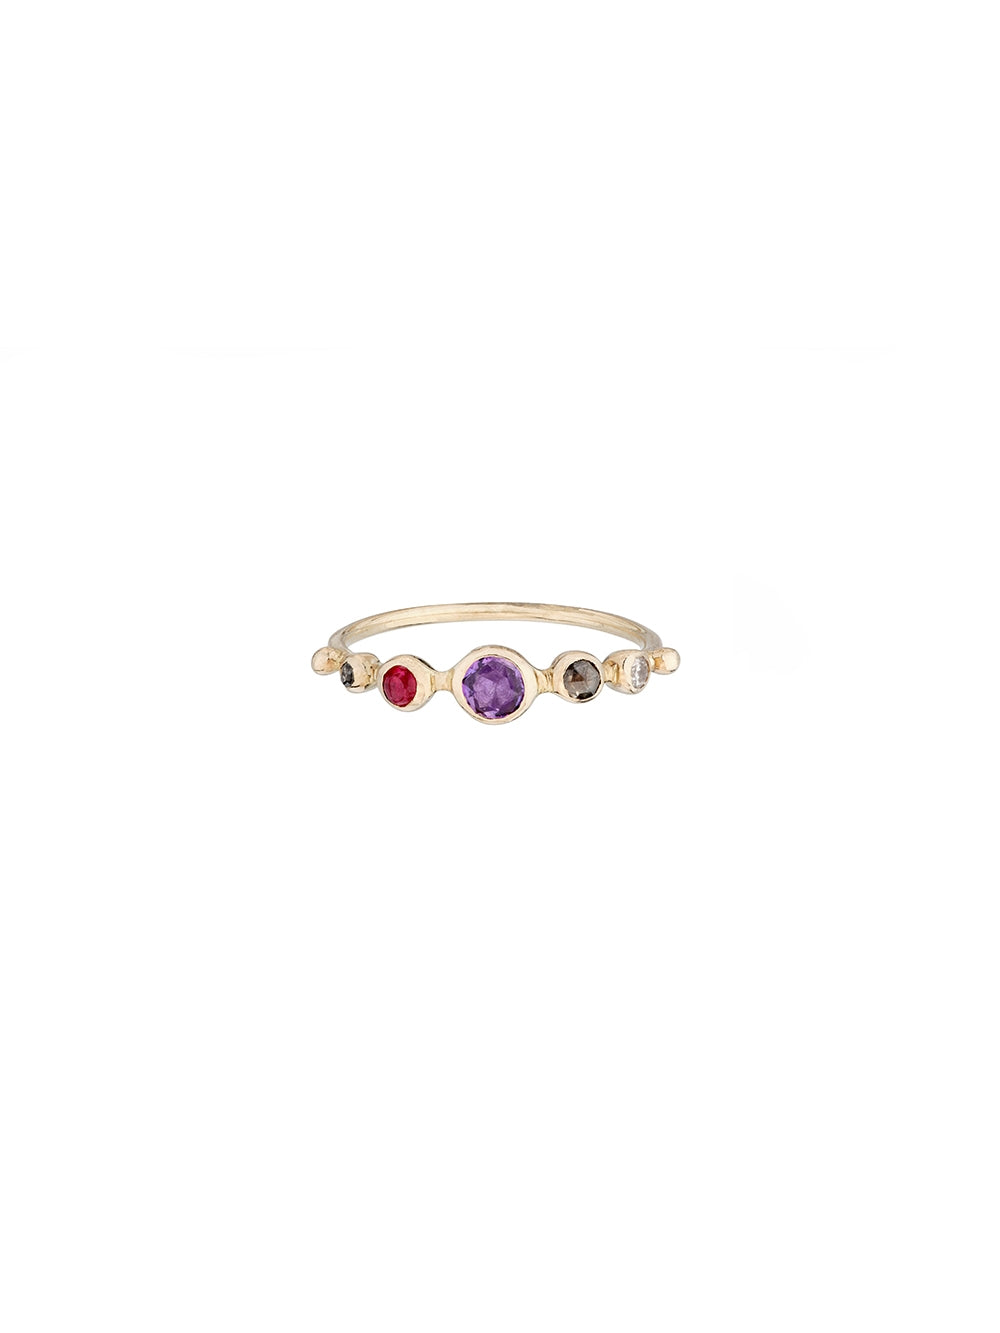 SINGLE RING SAPPHIRE & SPINEL